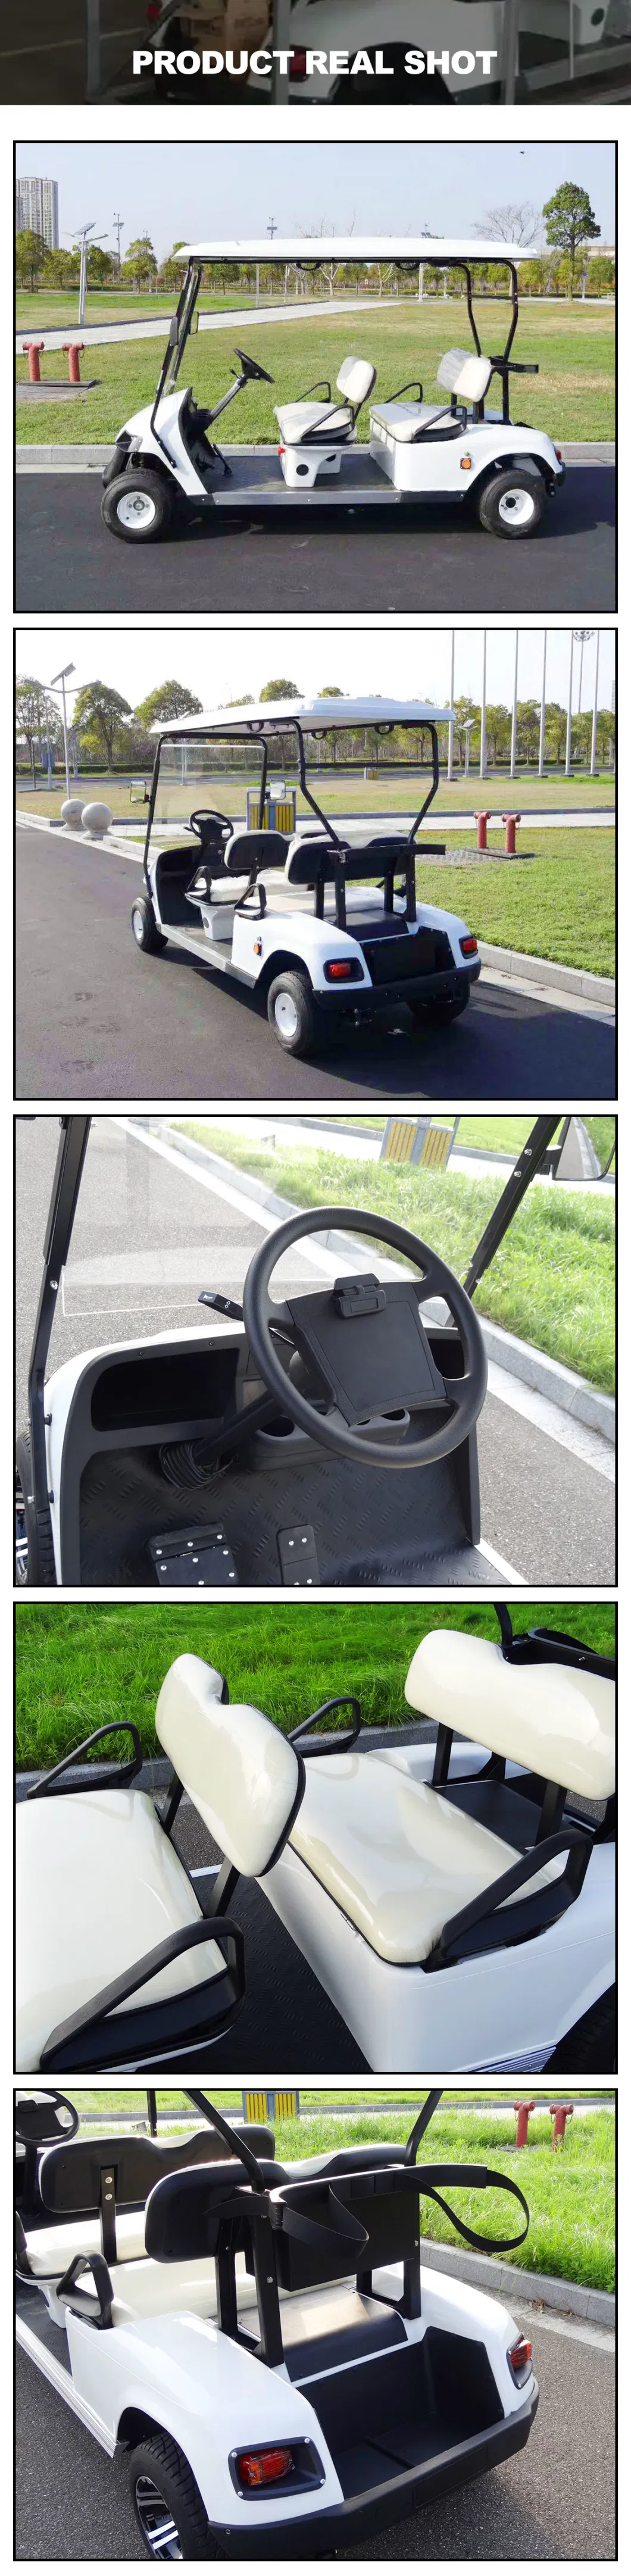 Electric Golf Cart for a Fun and Eco-Friendly Ride: 4 Seats, 4 Wheels, 80km Range and 30km/H Speed